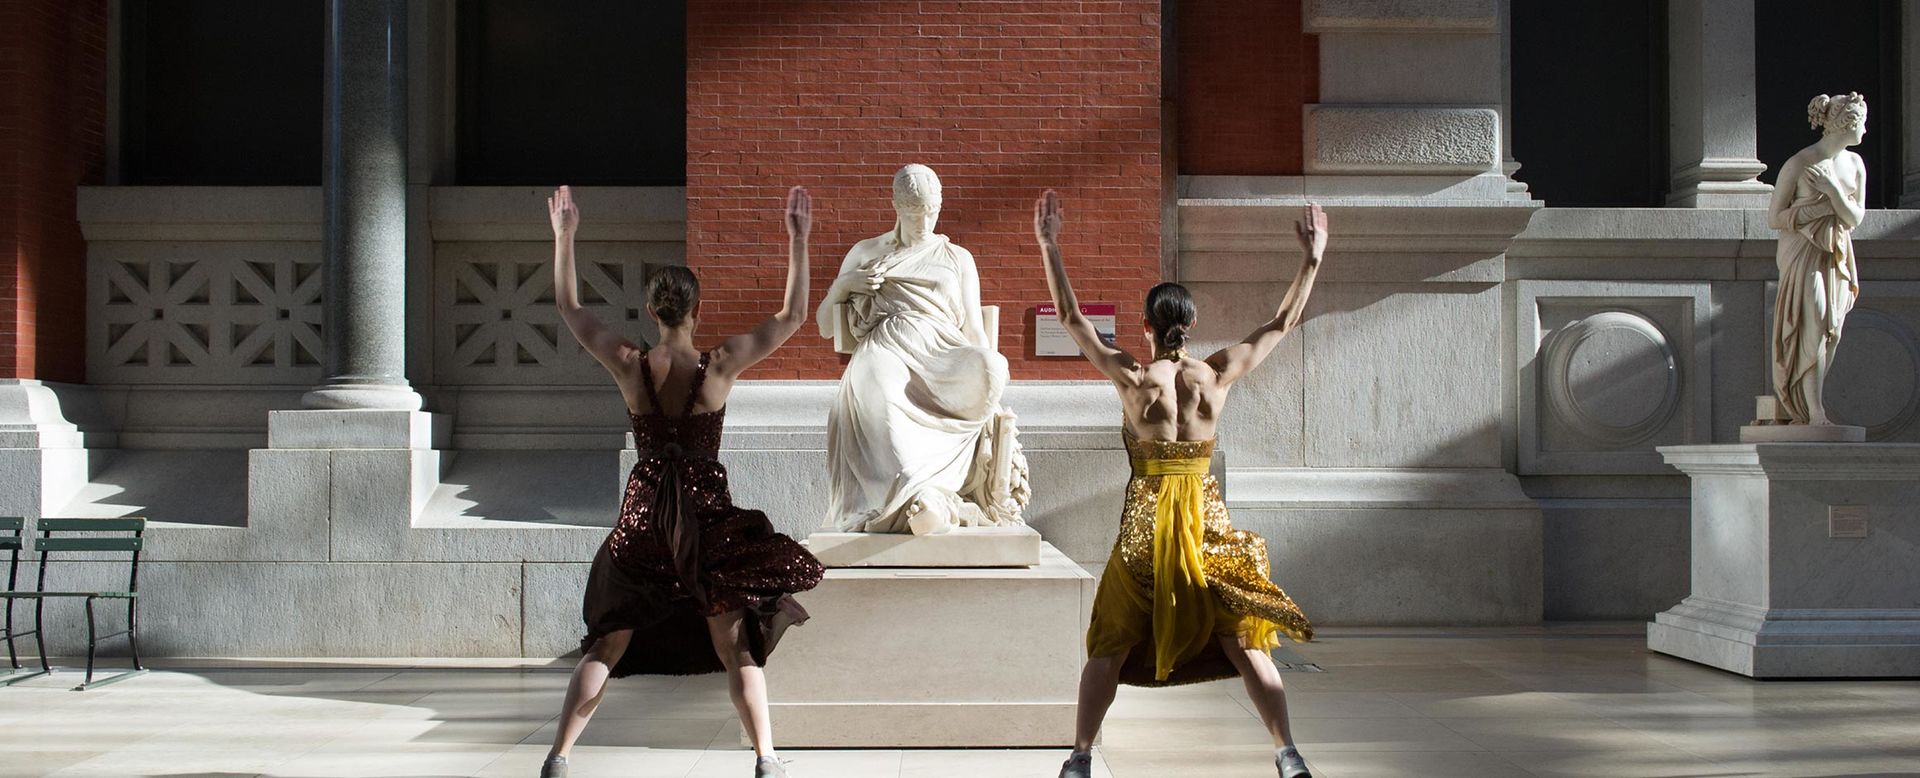 Two standing women, facing a statue of Sappho on opposites sides, with arms and legs spread during a museum workout